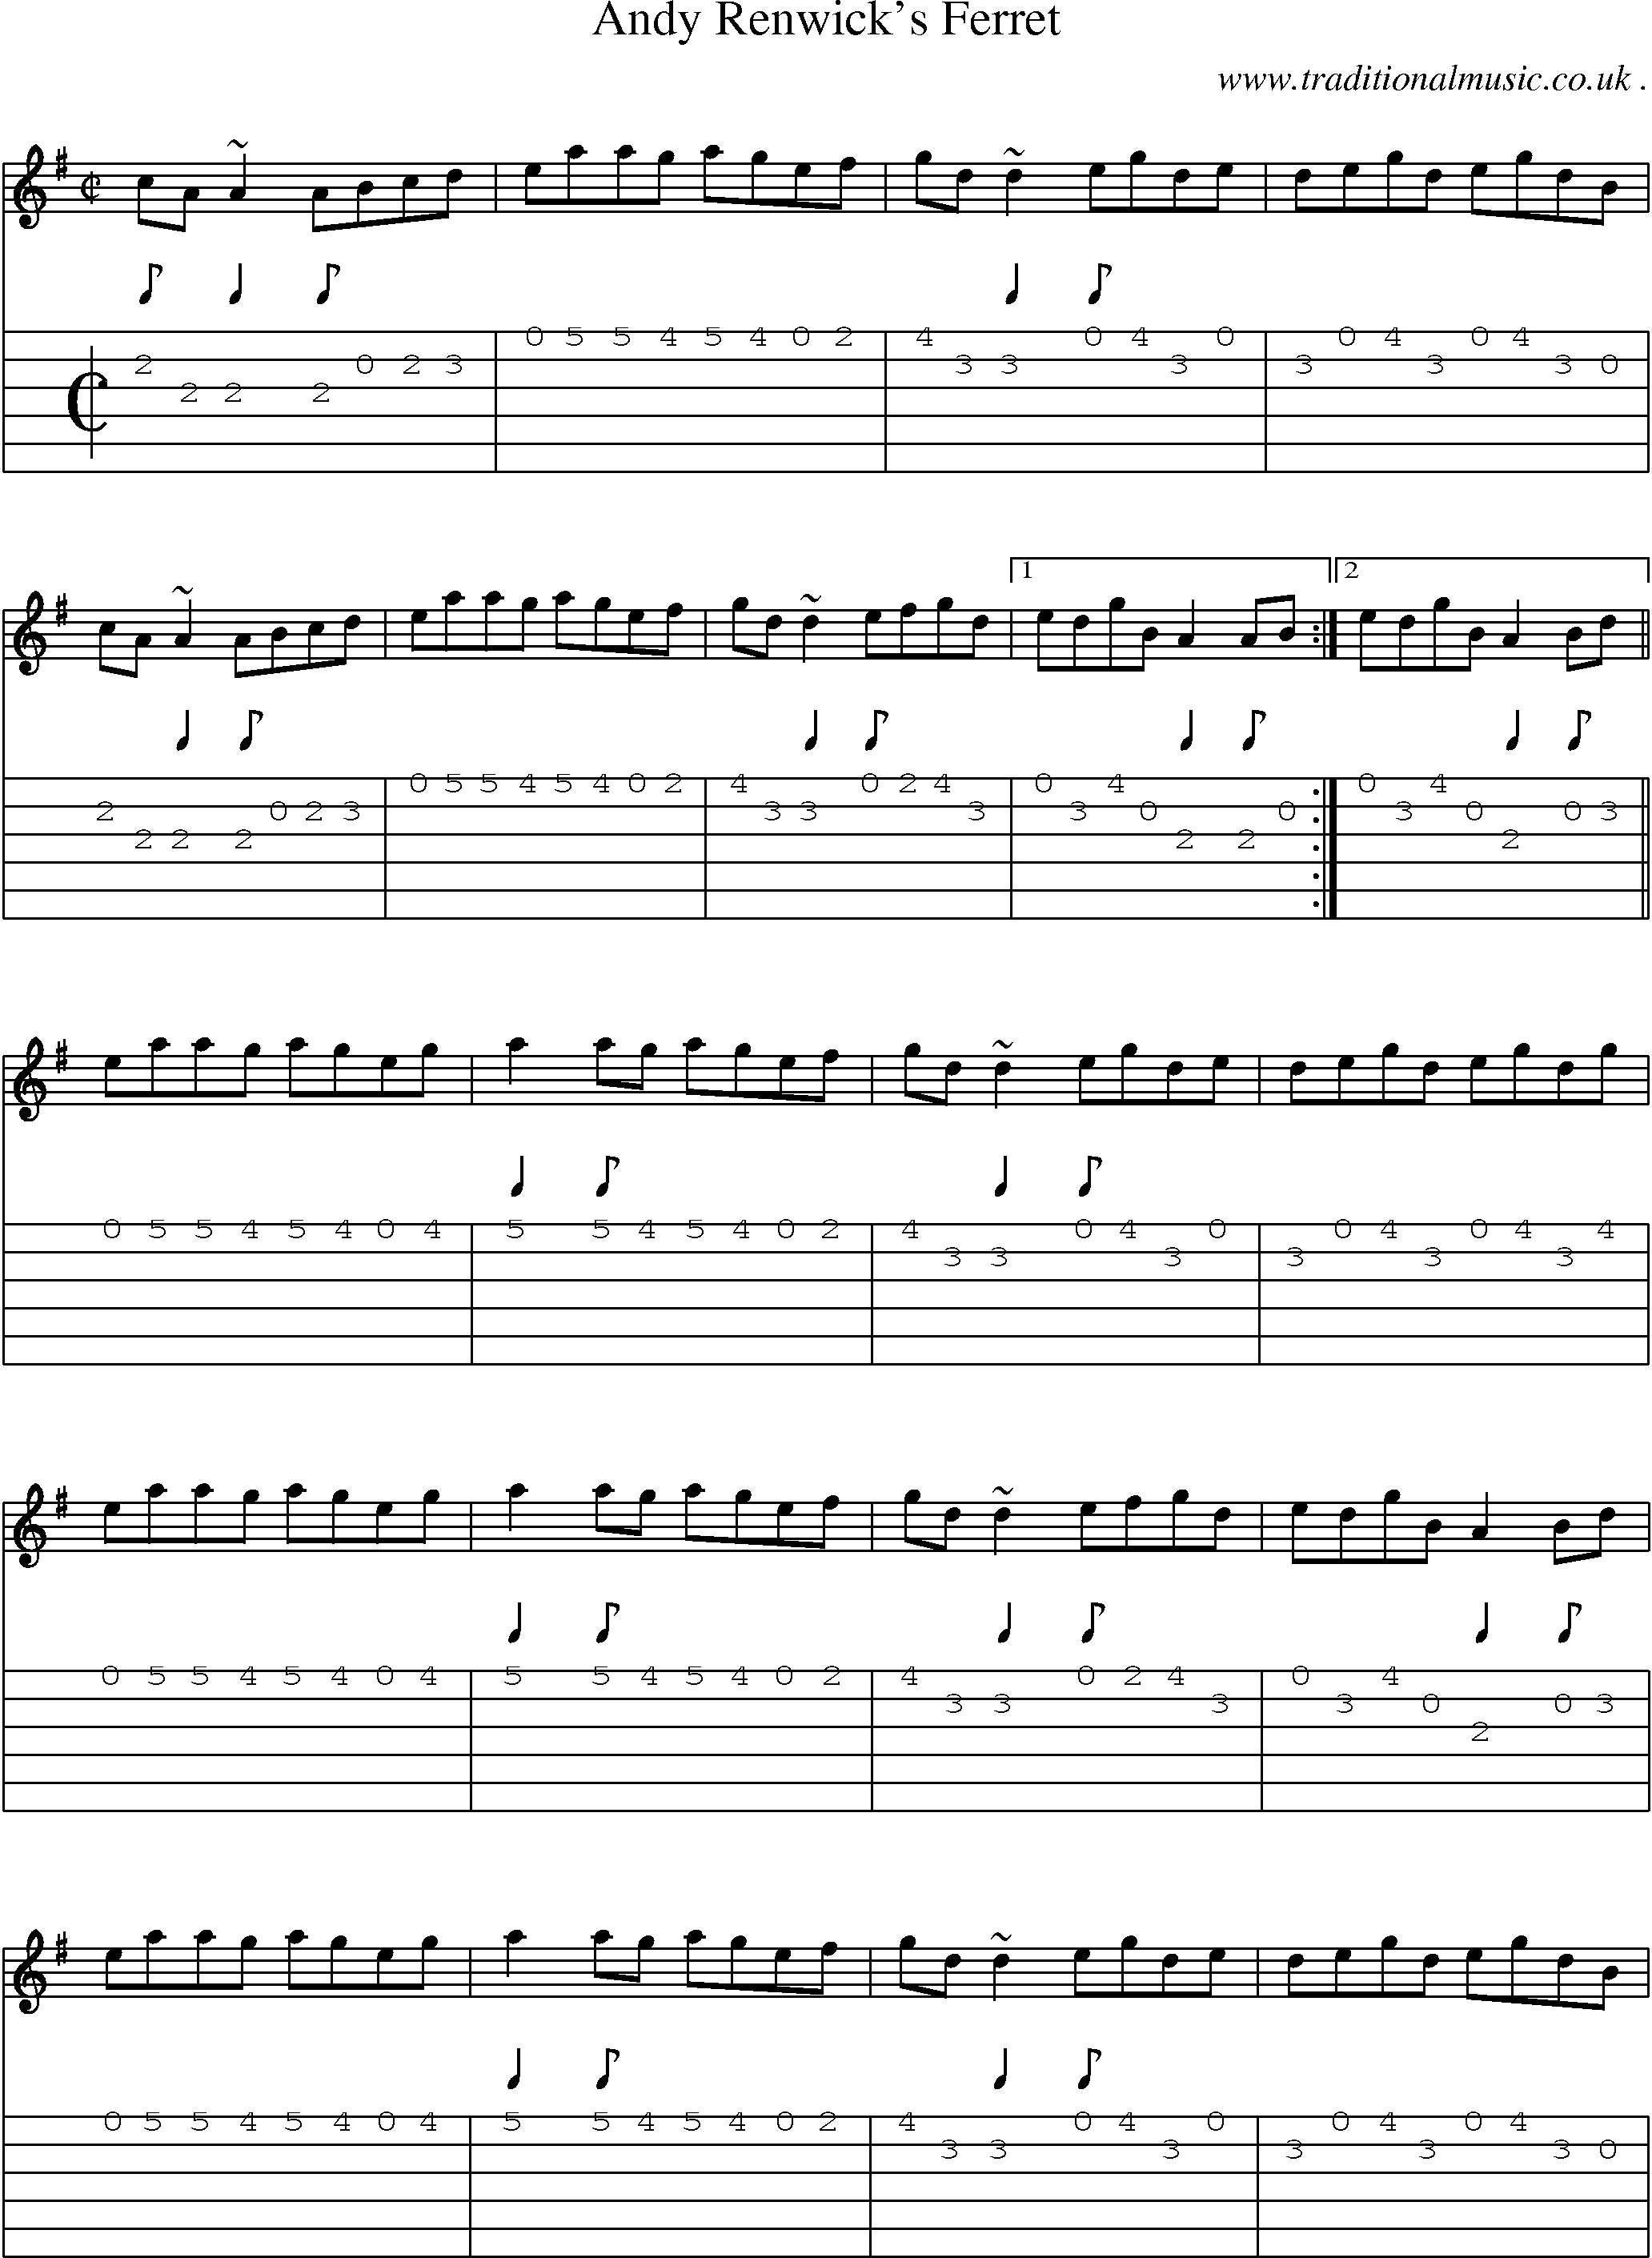 Sheet-music  score, Chords and Guitar Tabs for Andy Renwicks Ferret